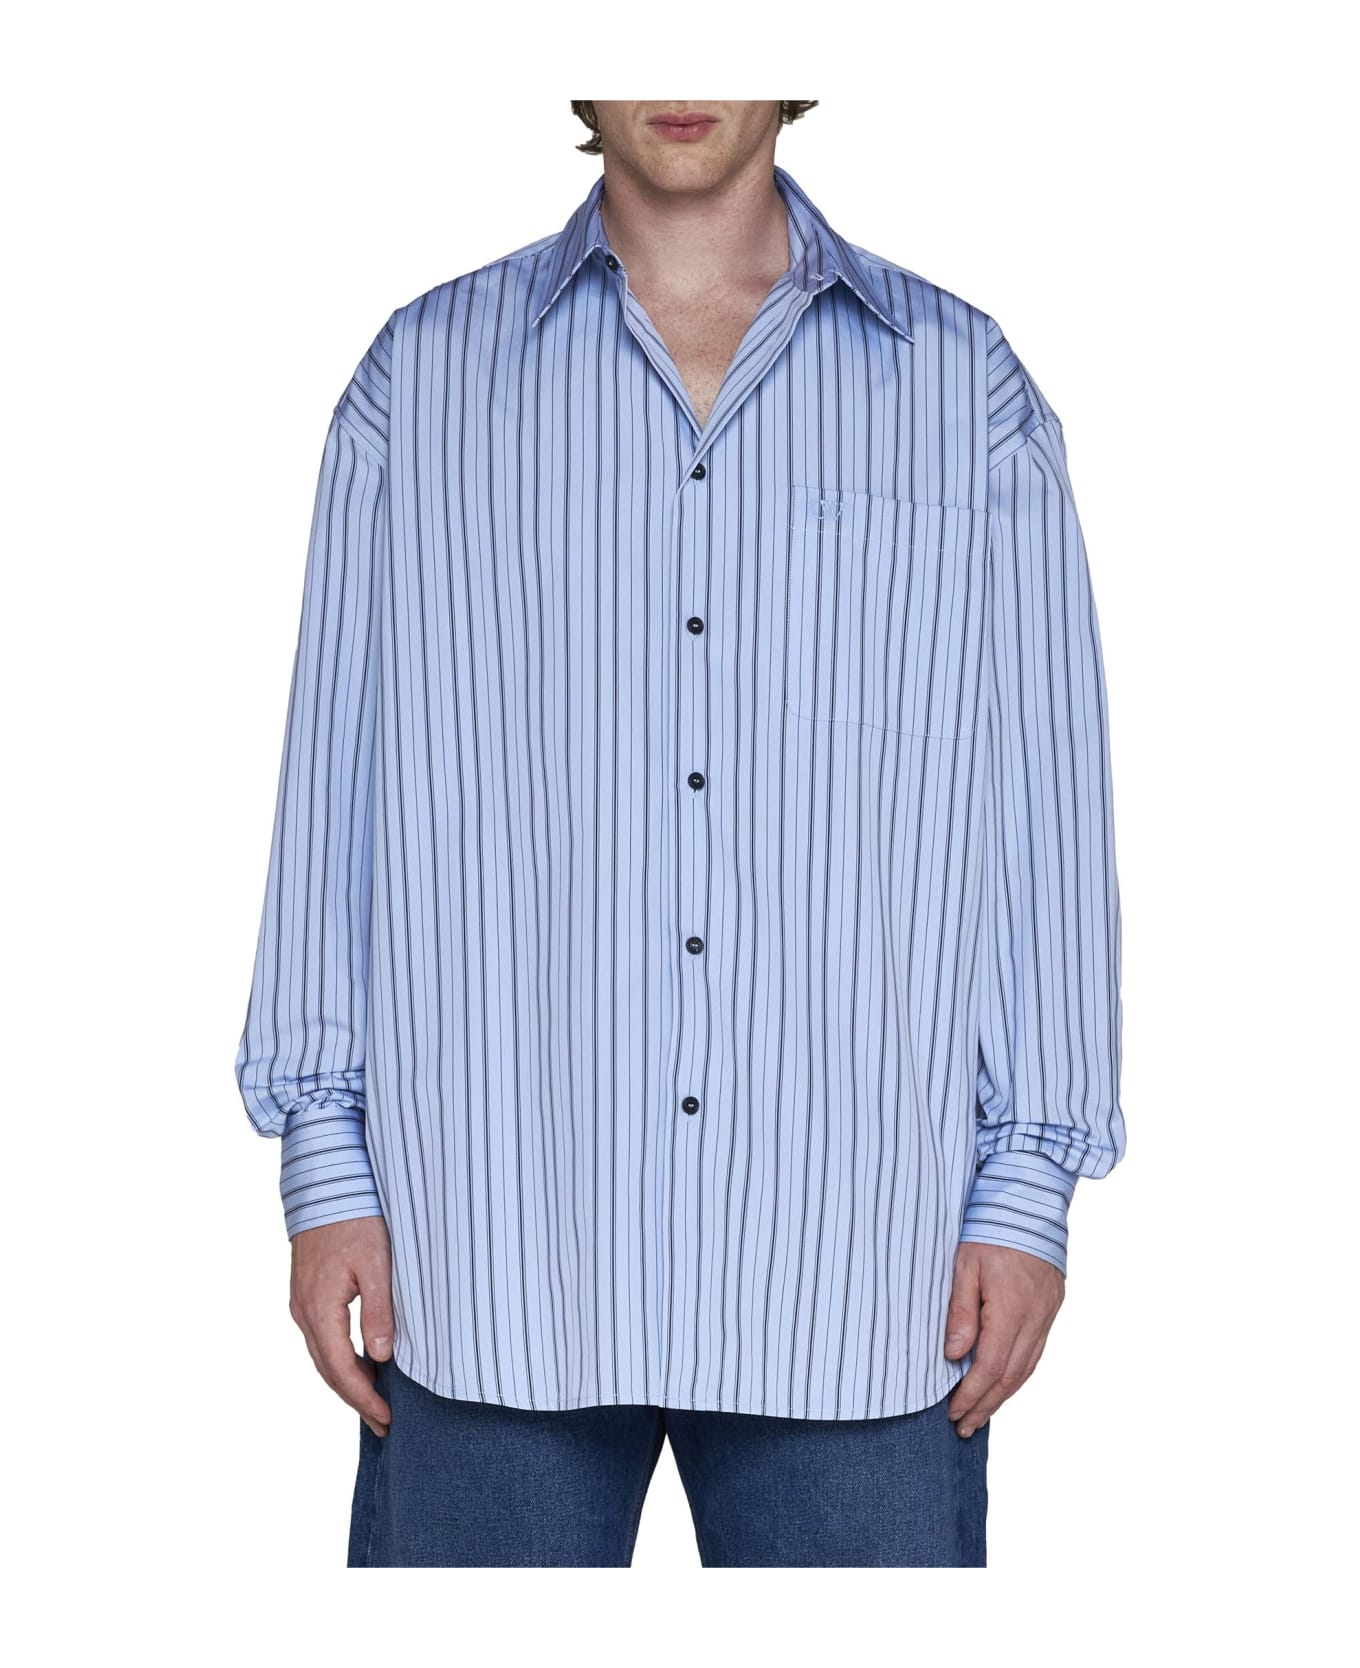 Off-White Embroidered Stripe Shirt - Placid blue